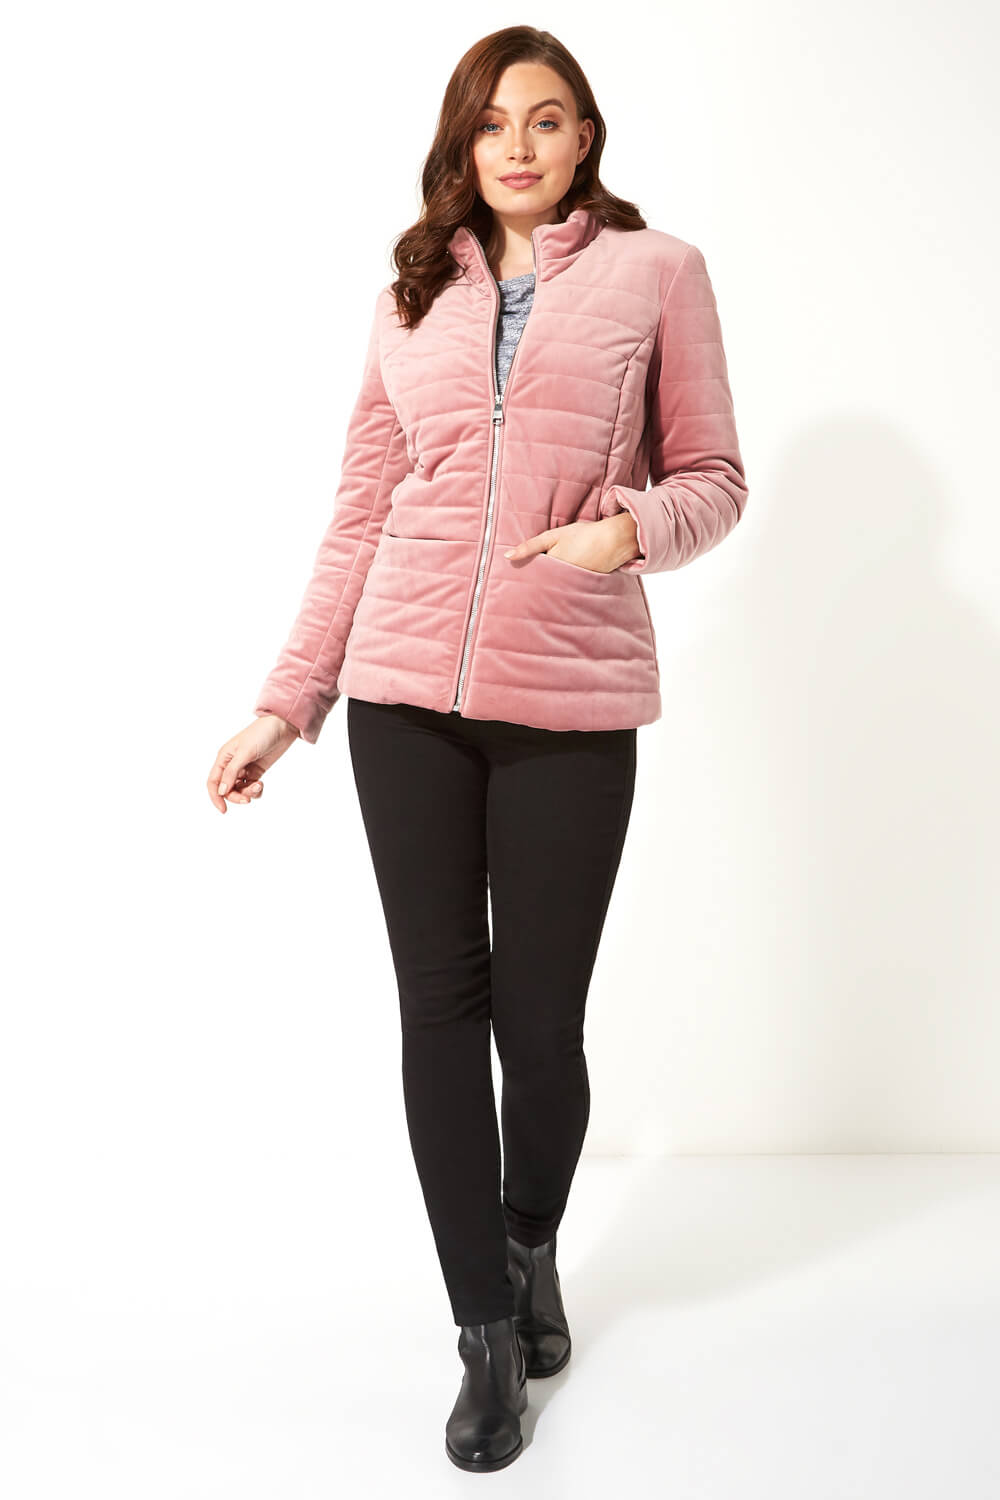 PINK Velour Texture Quilted Jacket, Image 2 of 5